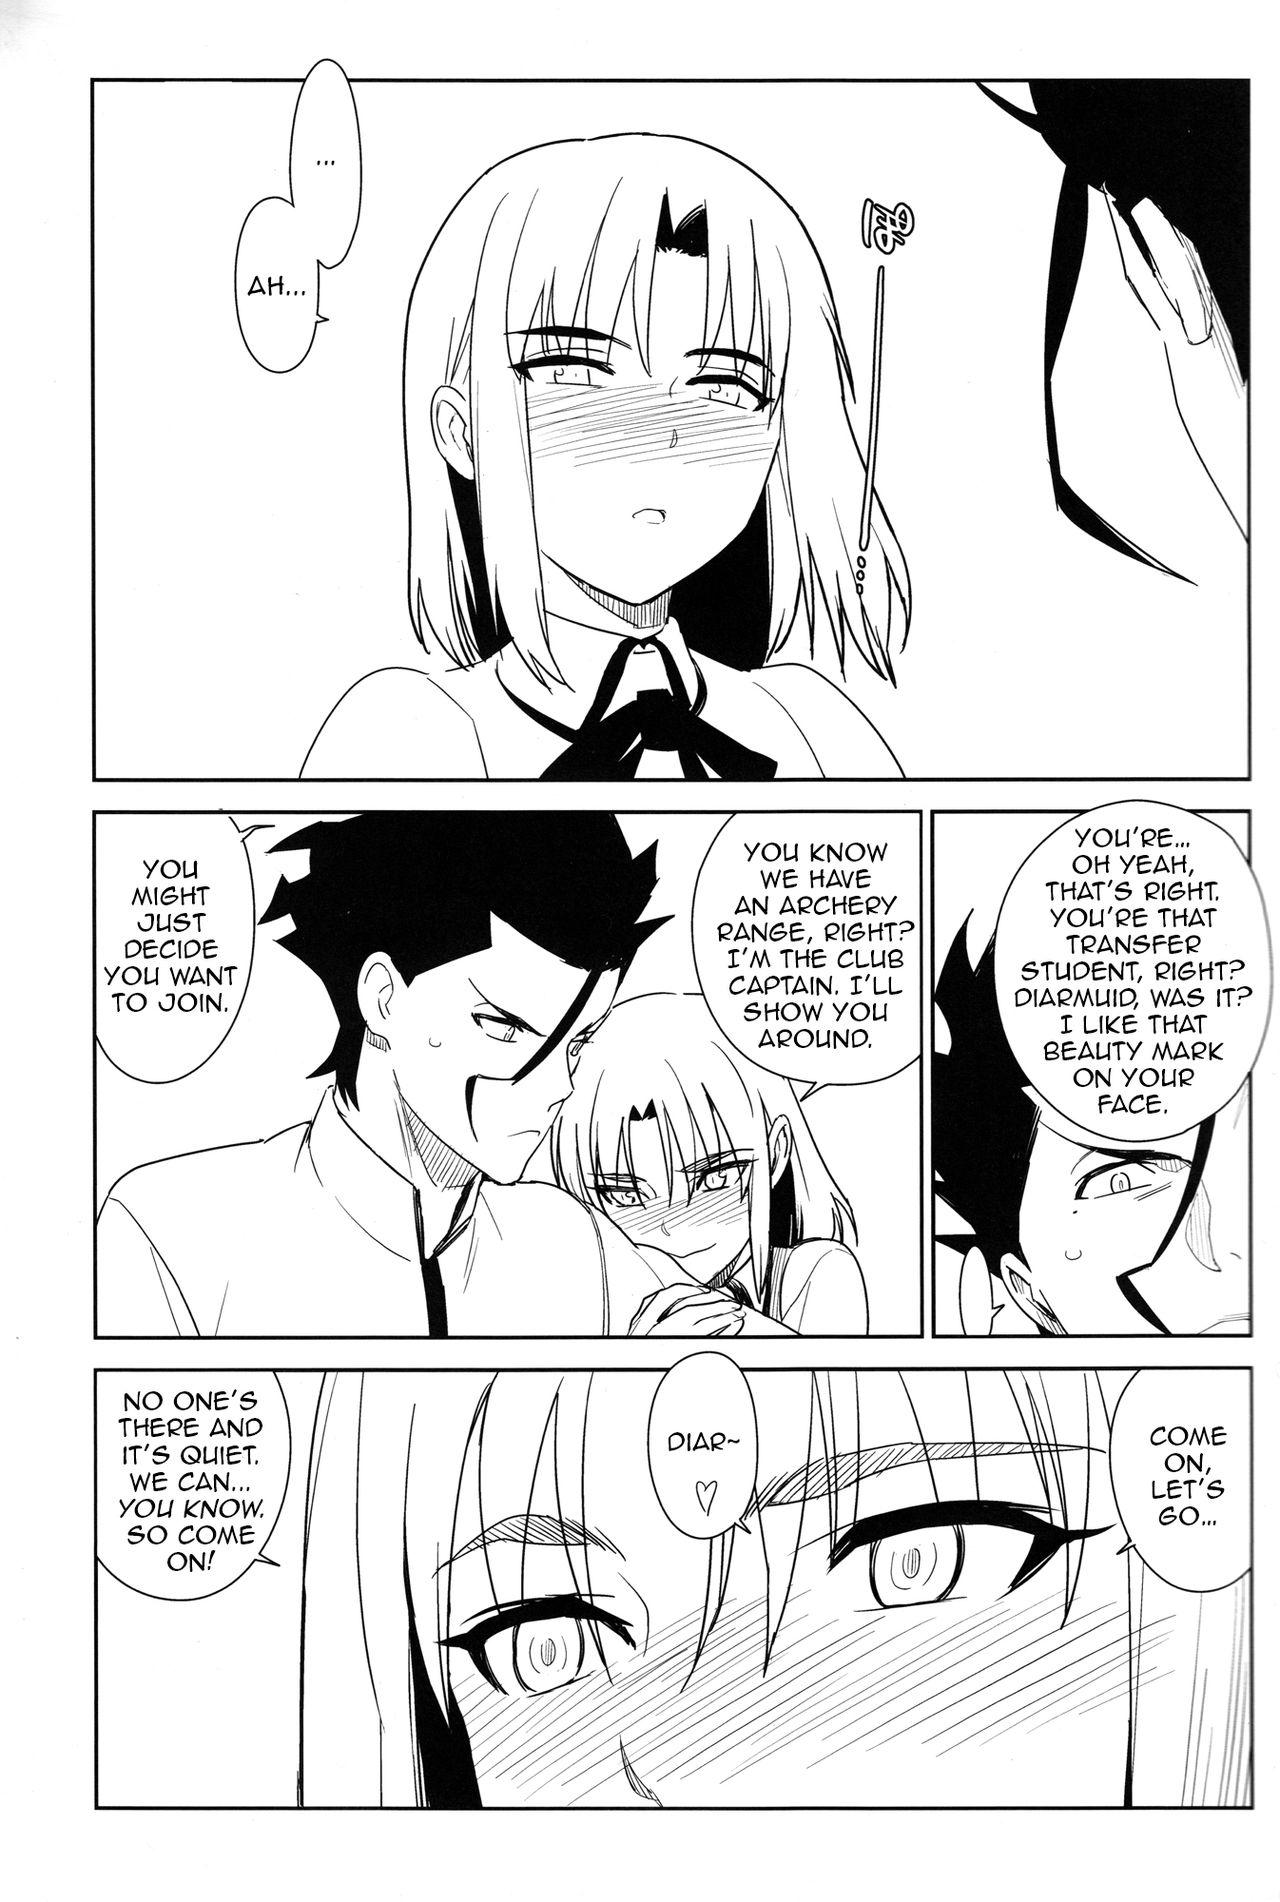 Best Blowjobs if - Fate zero Piss - Page 4